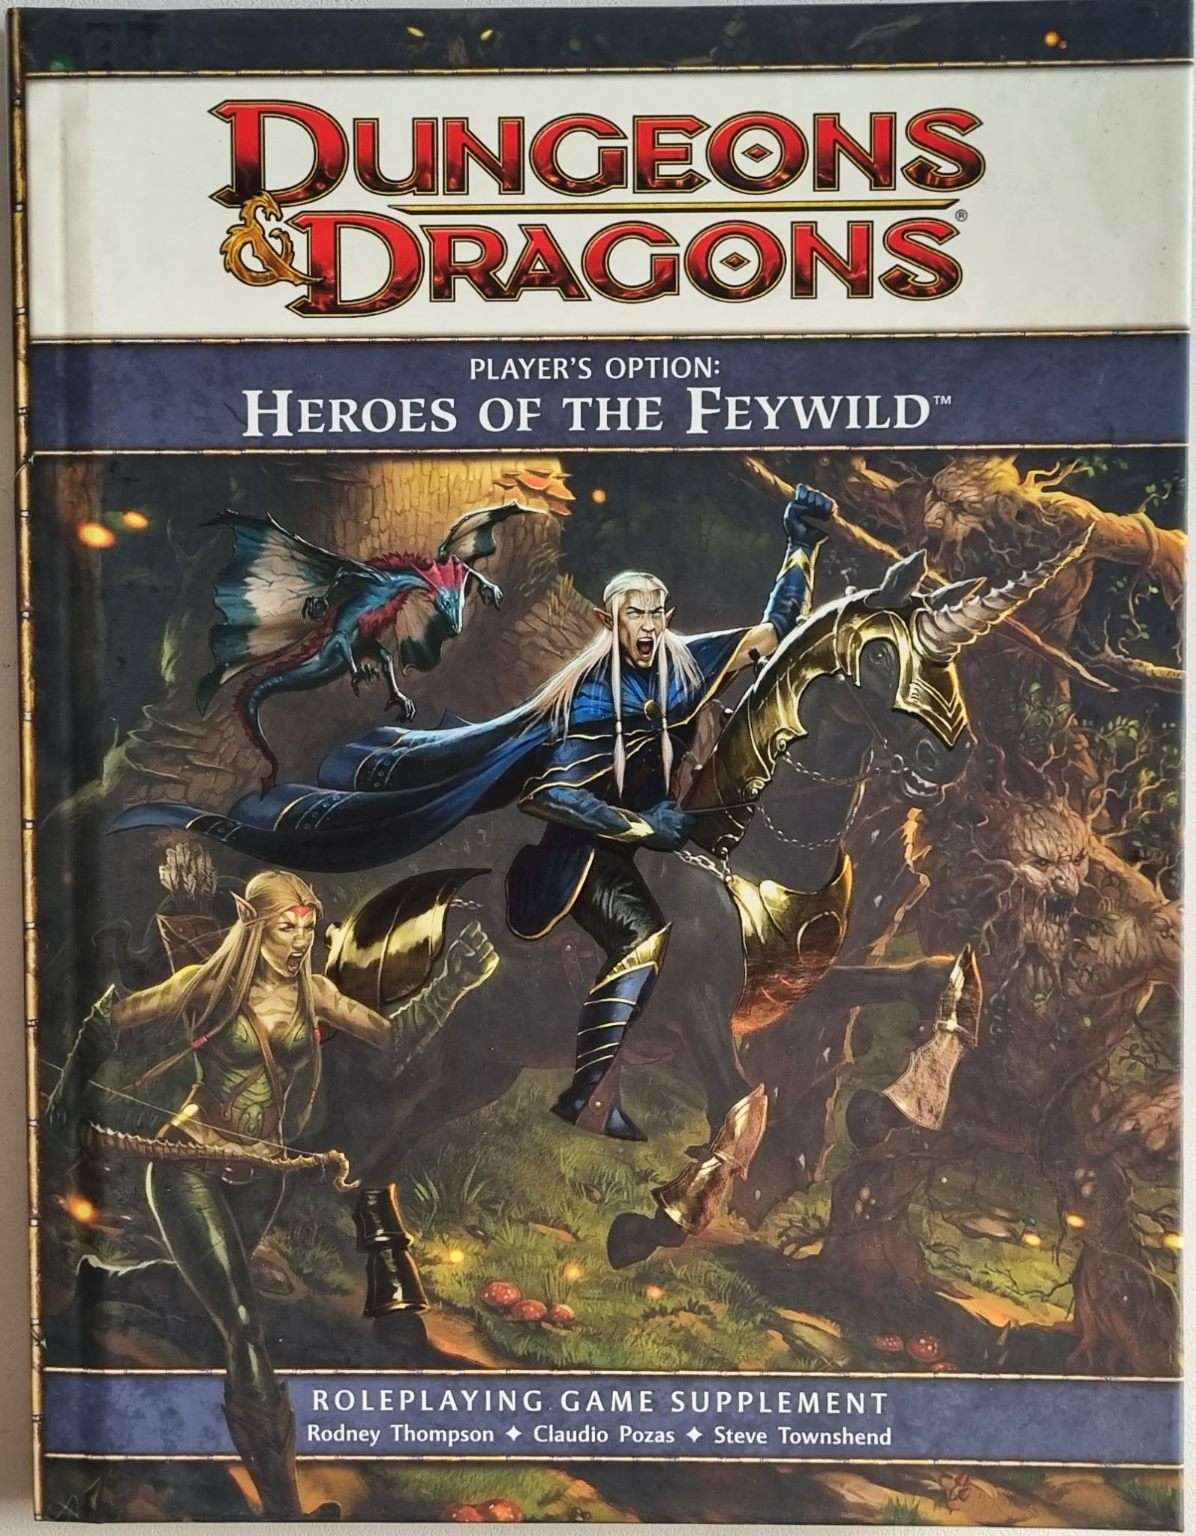 Dungeons and Dragons: Player's Options: Heroes of the Feywild (4e)